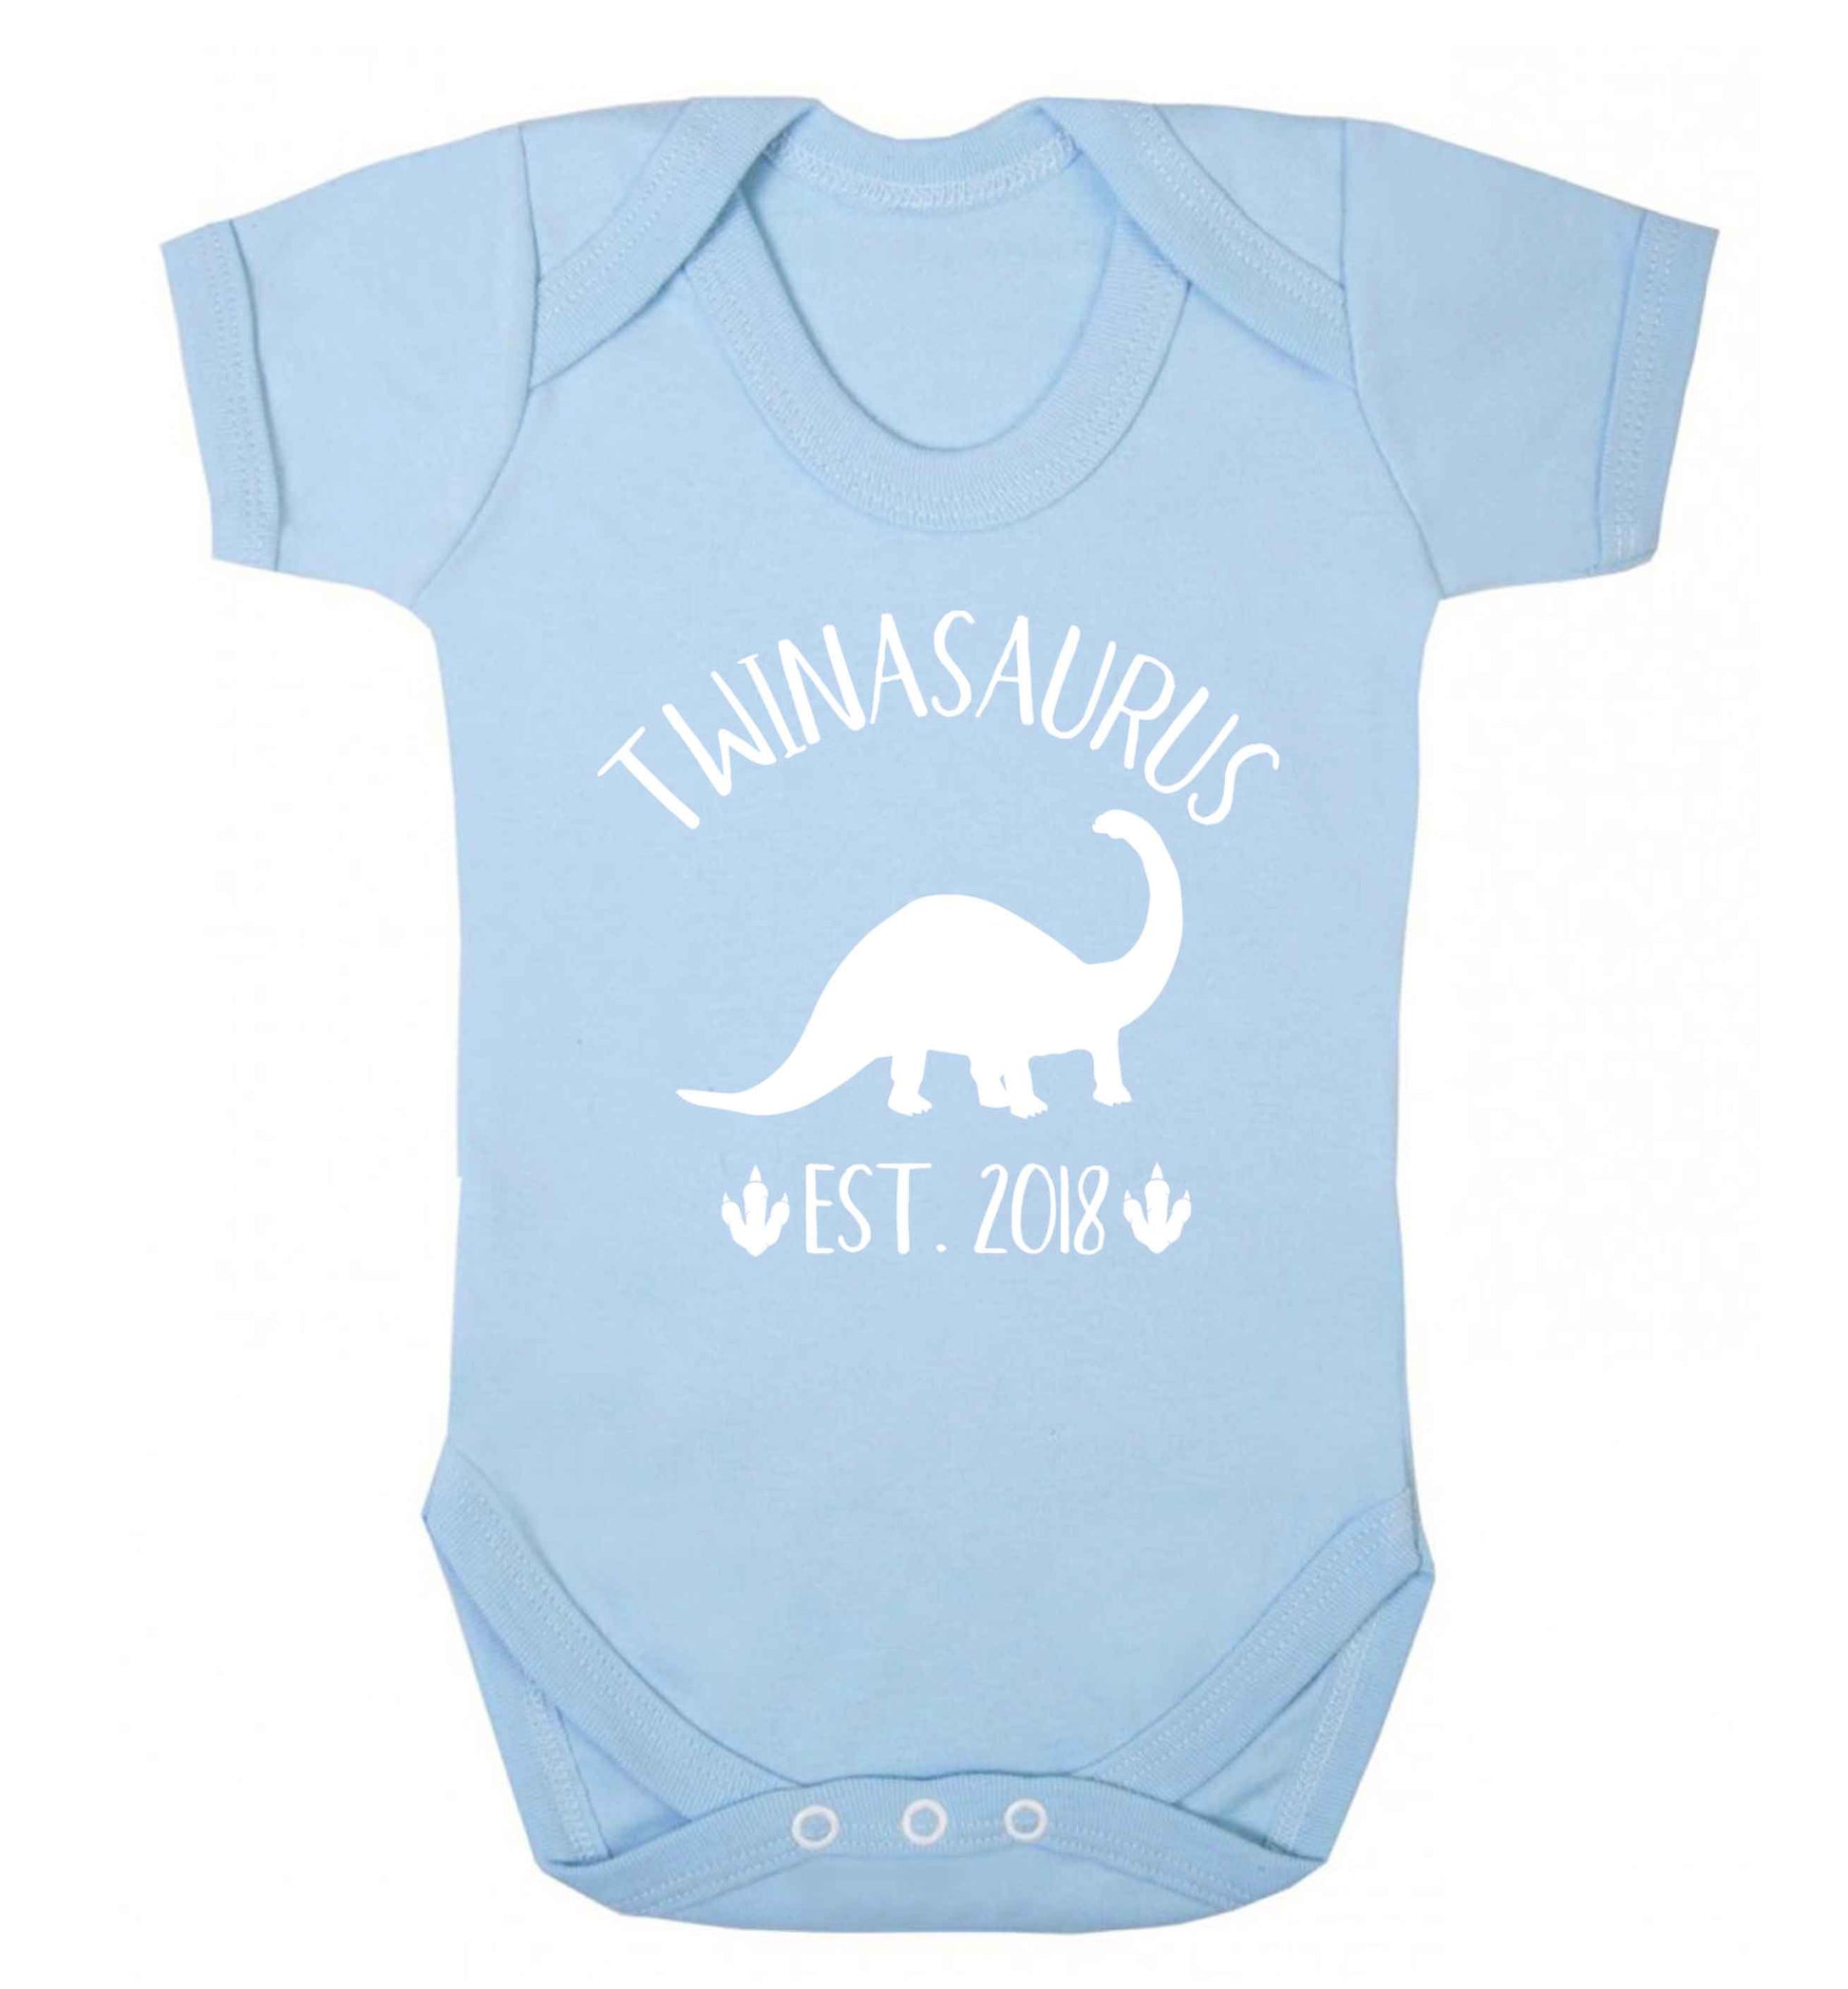 Personalised twinasaurus since (custom date) Baby Vest pale blue 18-24 months